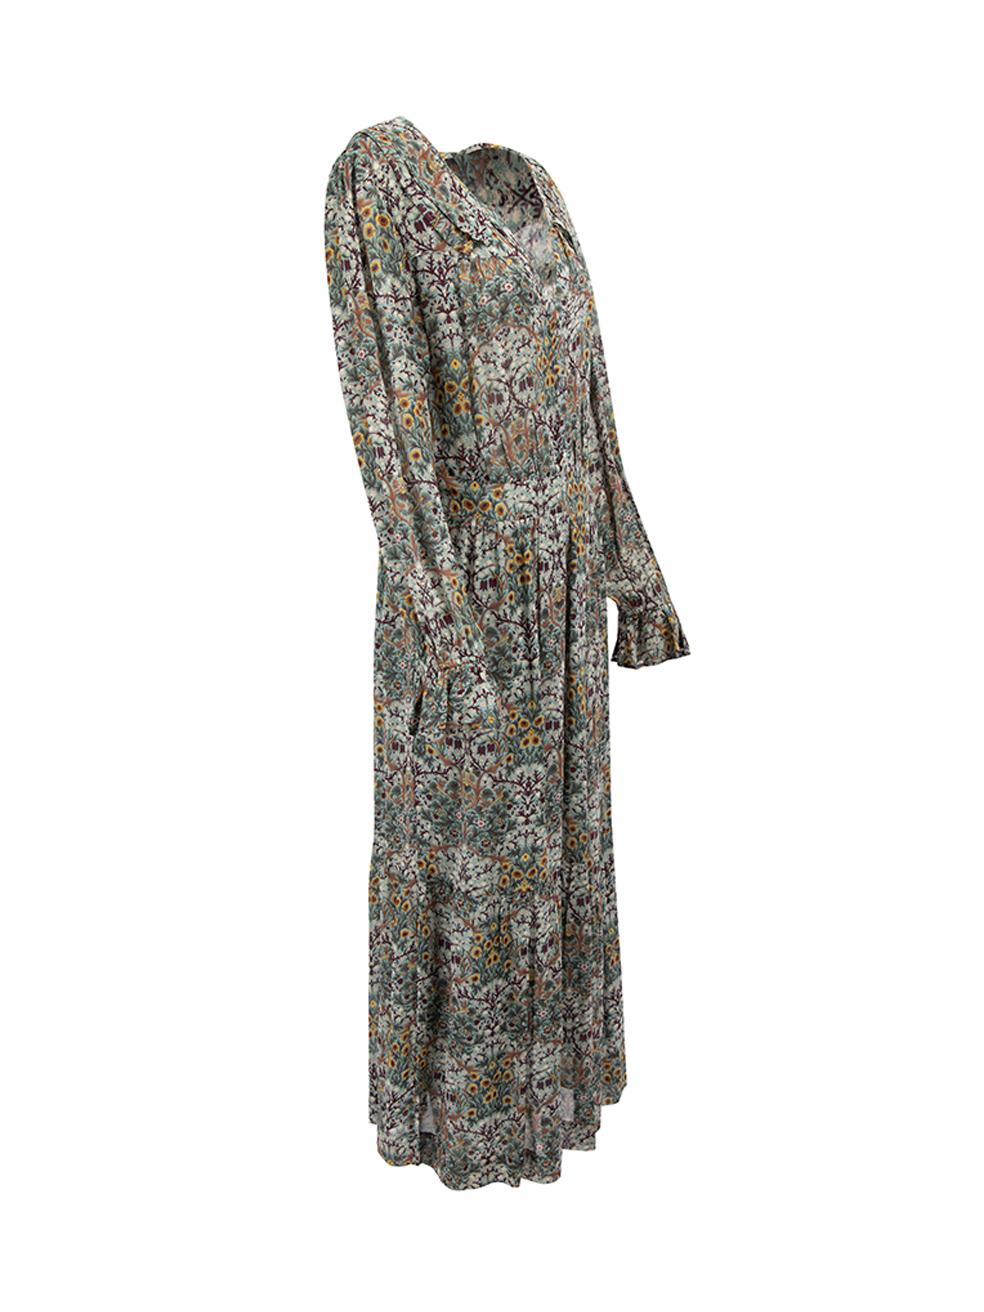 CONDITION is Never worn, with tags. No visible wear to dress is evident on this new ba&sh designer resale item.
 
 Details
 Multicoloured
 Viscose
 Maxi dress
 Loose fit
 V neck
 Long sleeve
 Side zipper fastening
 
 
 Made in India
 
 Composition
